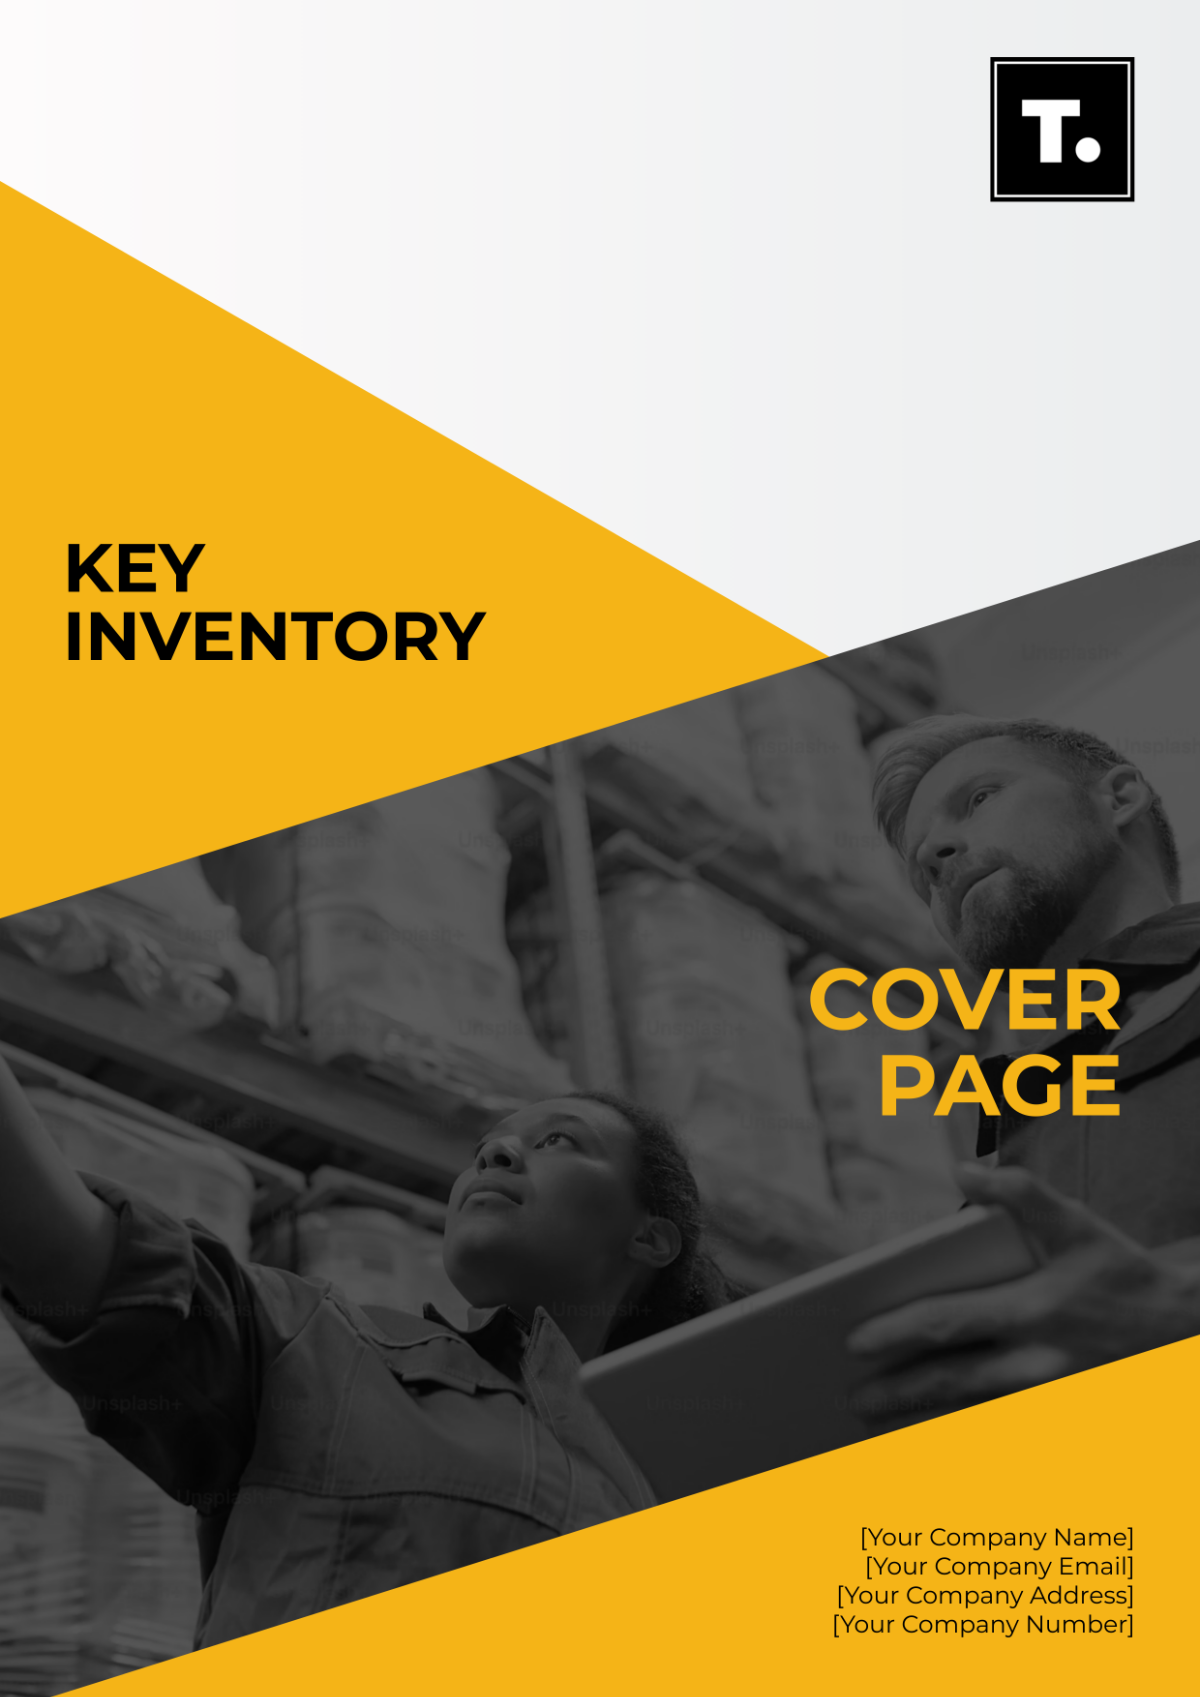 Key Inventory Cover Page